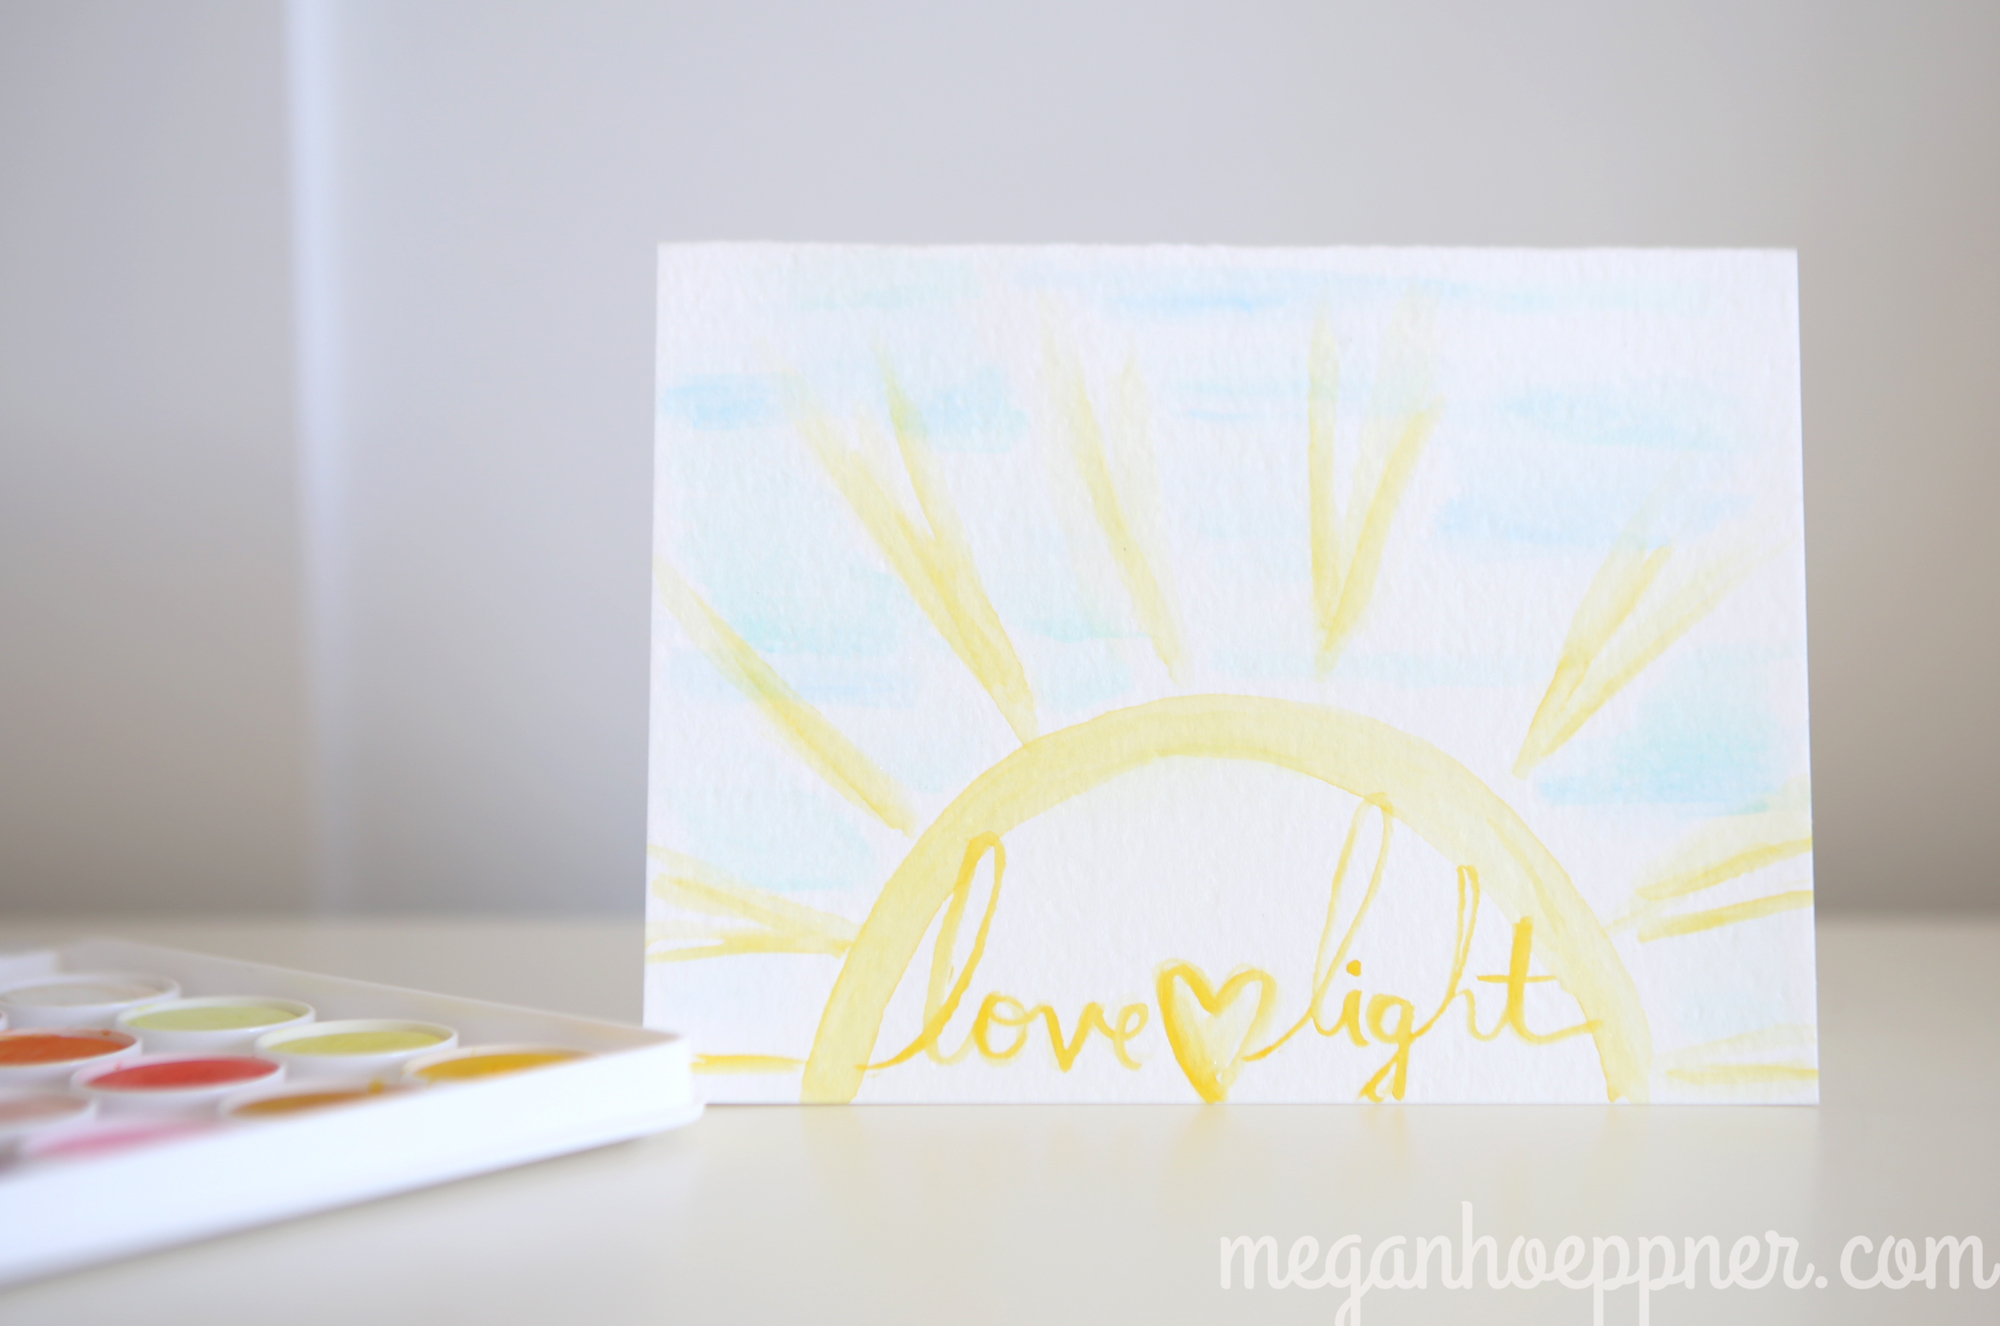 More About Sparkle Watercolor Gel Crayons (and card opinions needed) —  Megan Hoeppner